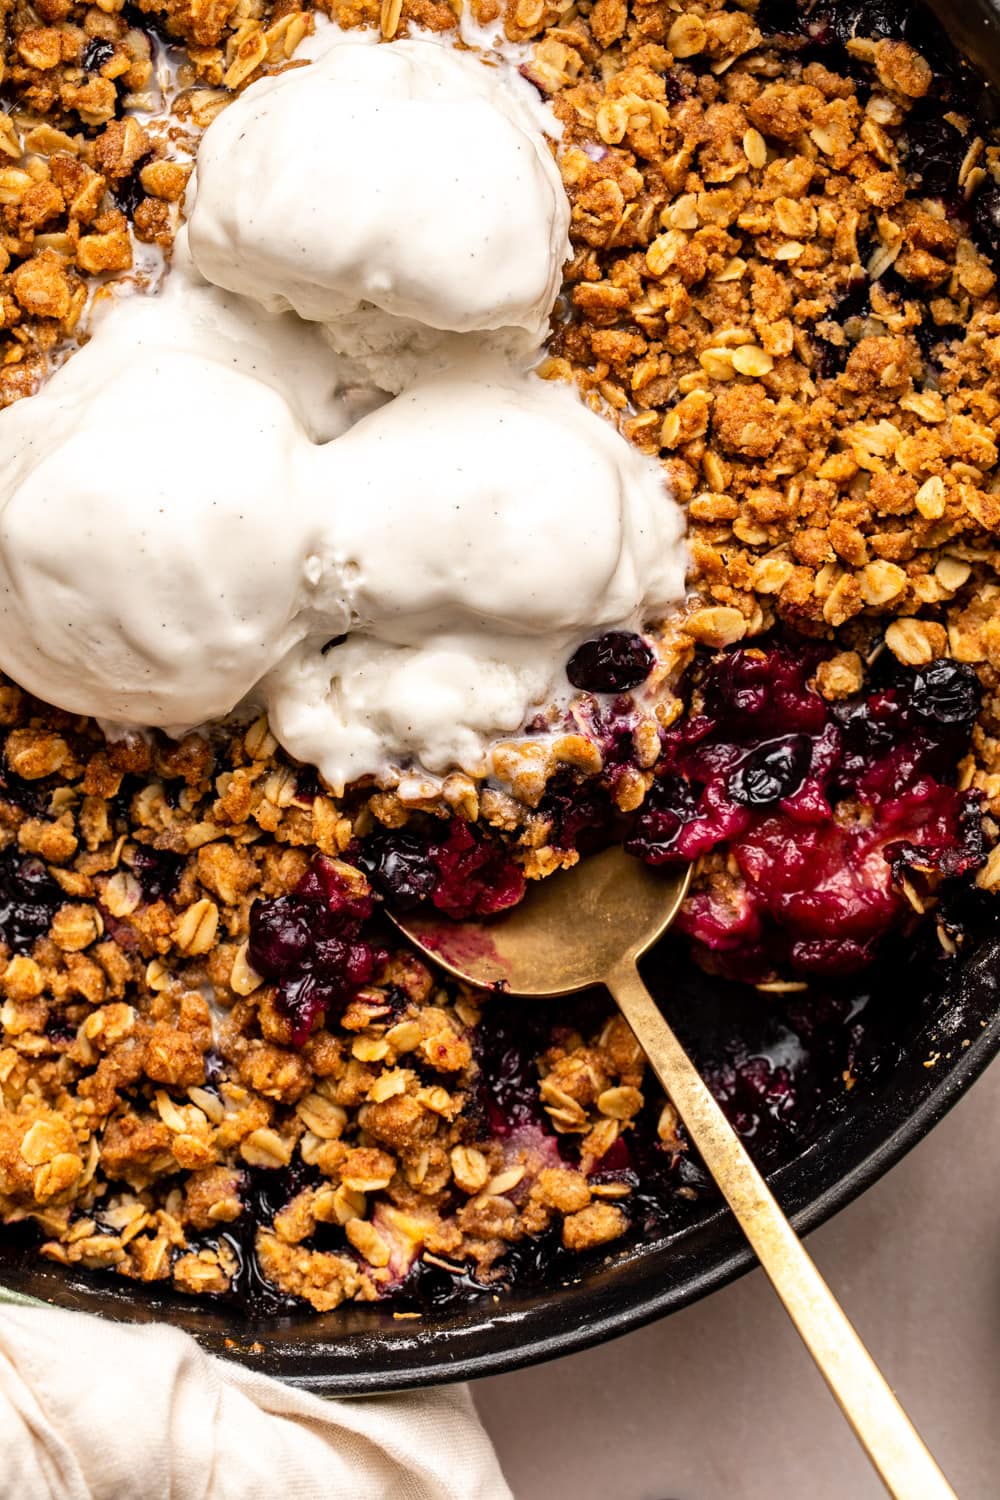 a zoomed in image of apple blueberry crisp served with vanilla ice cream on top with a spoon digging up a portion